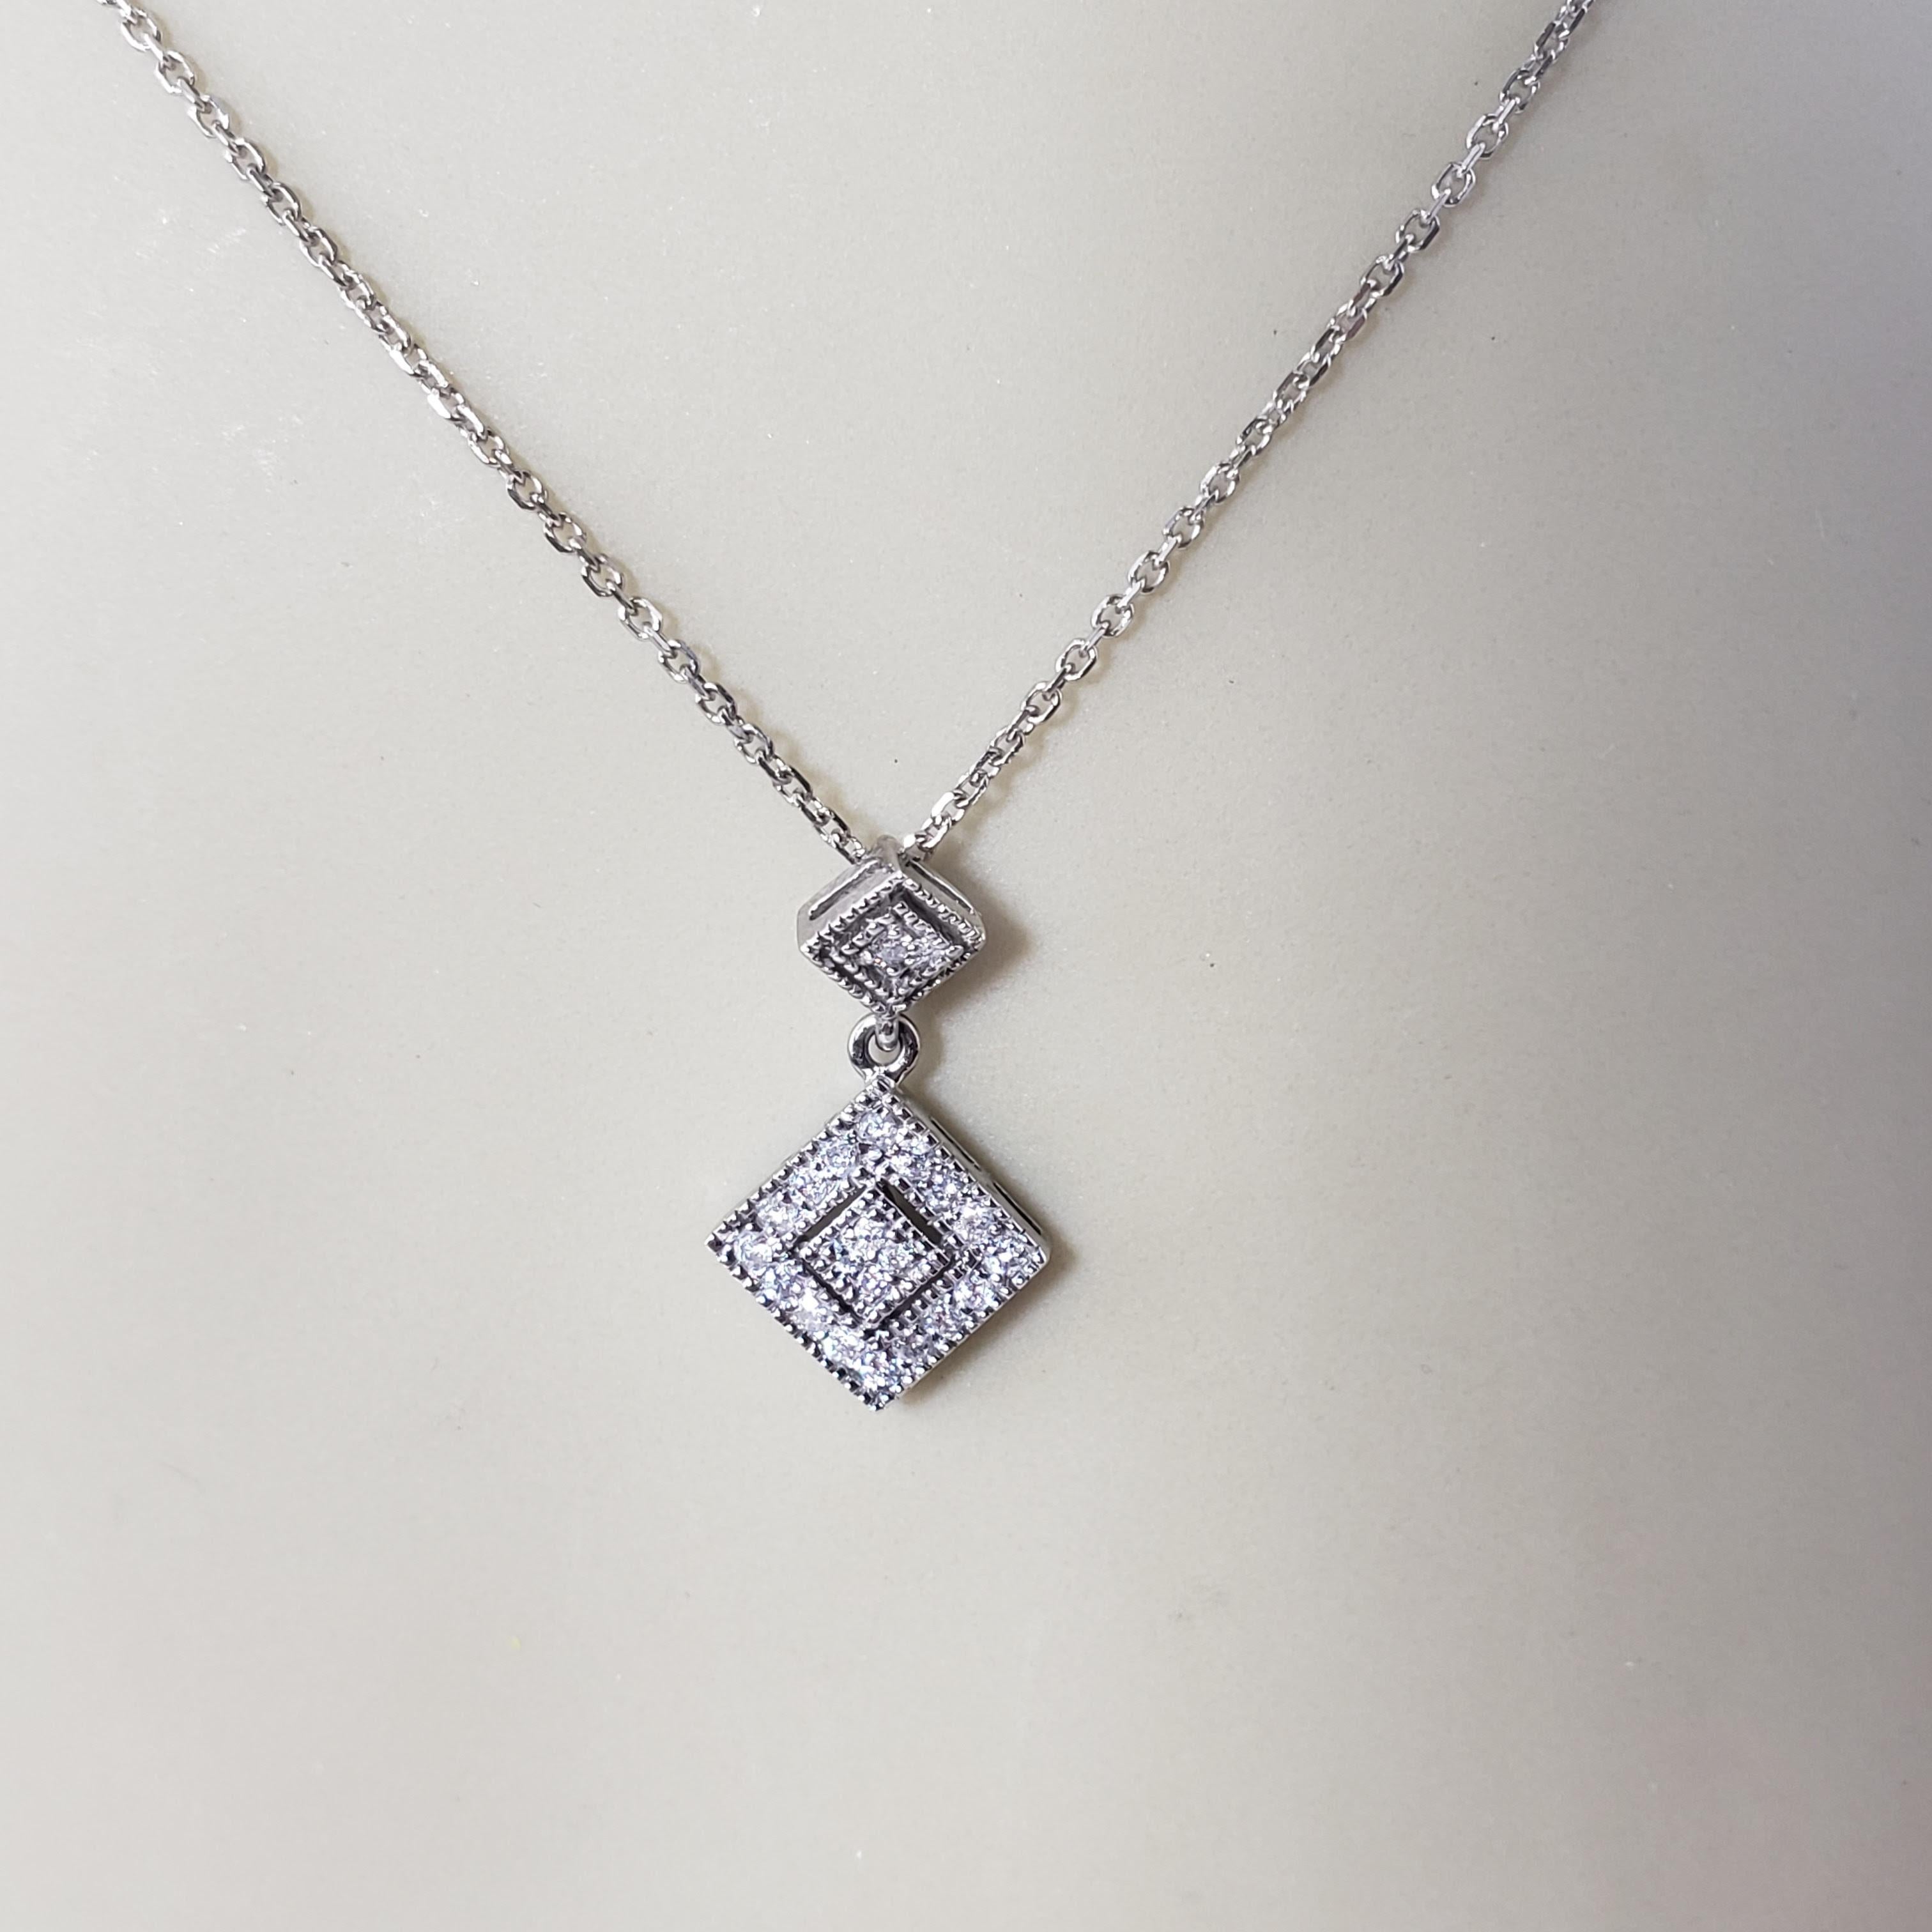 10/14 Karat White Gold and Diamond Pendant Necklace For Sale 3